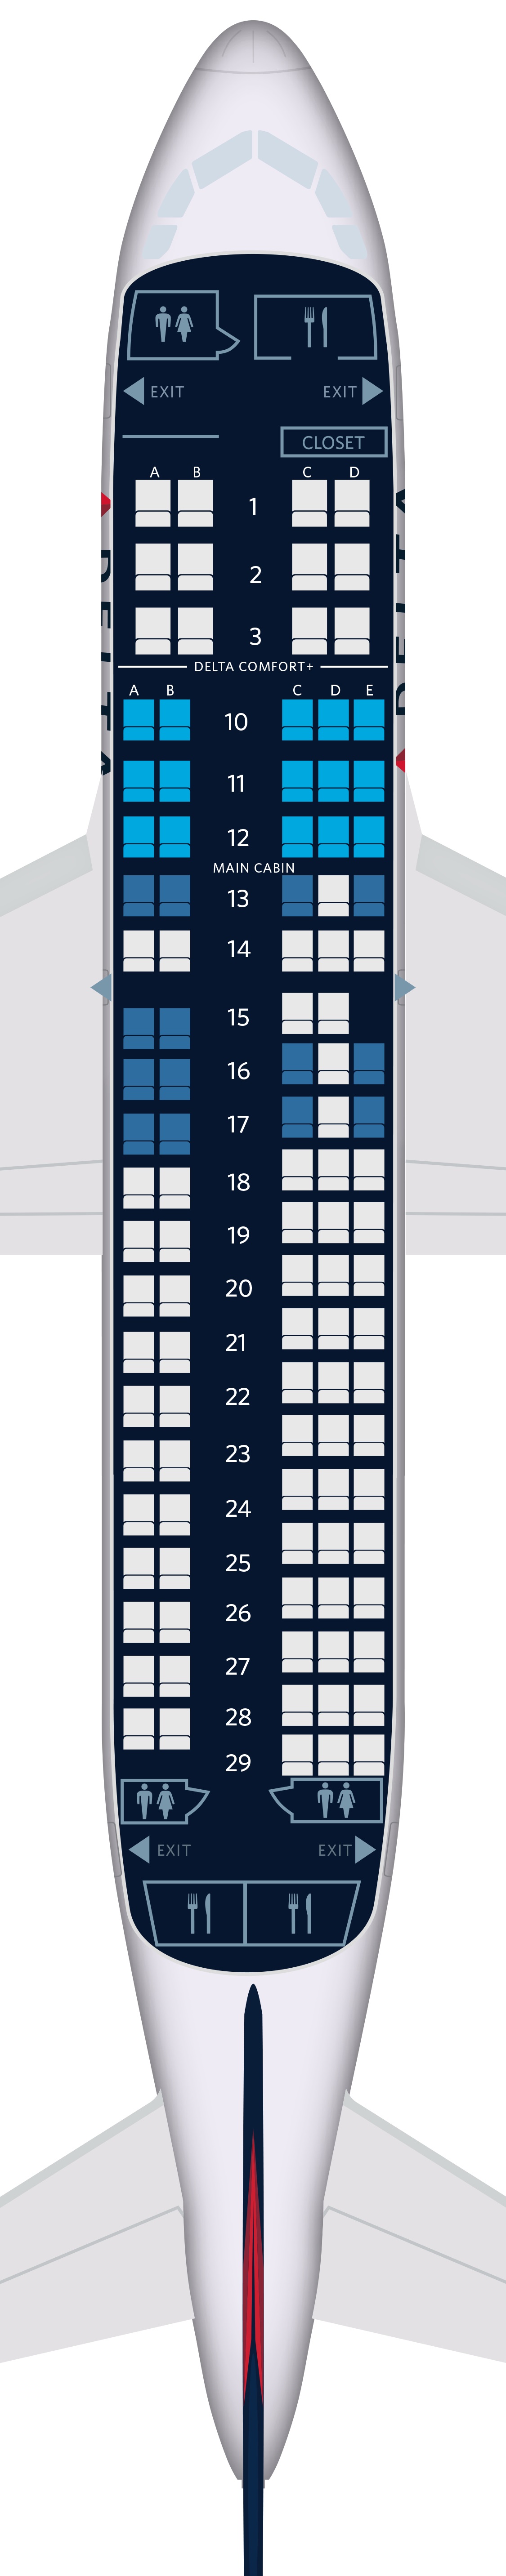 Airbus A220-100 Seat Maps, Specs & Amenities | Delta Air Lines